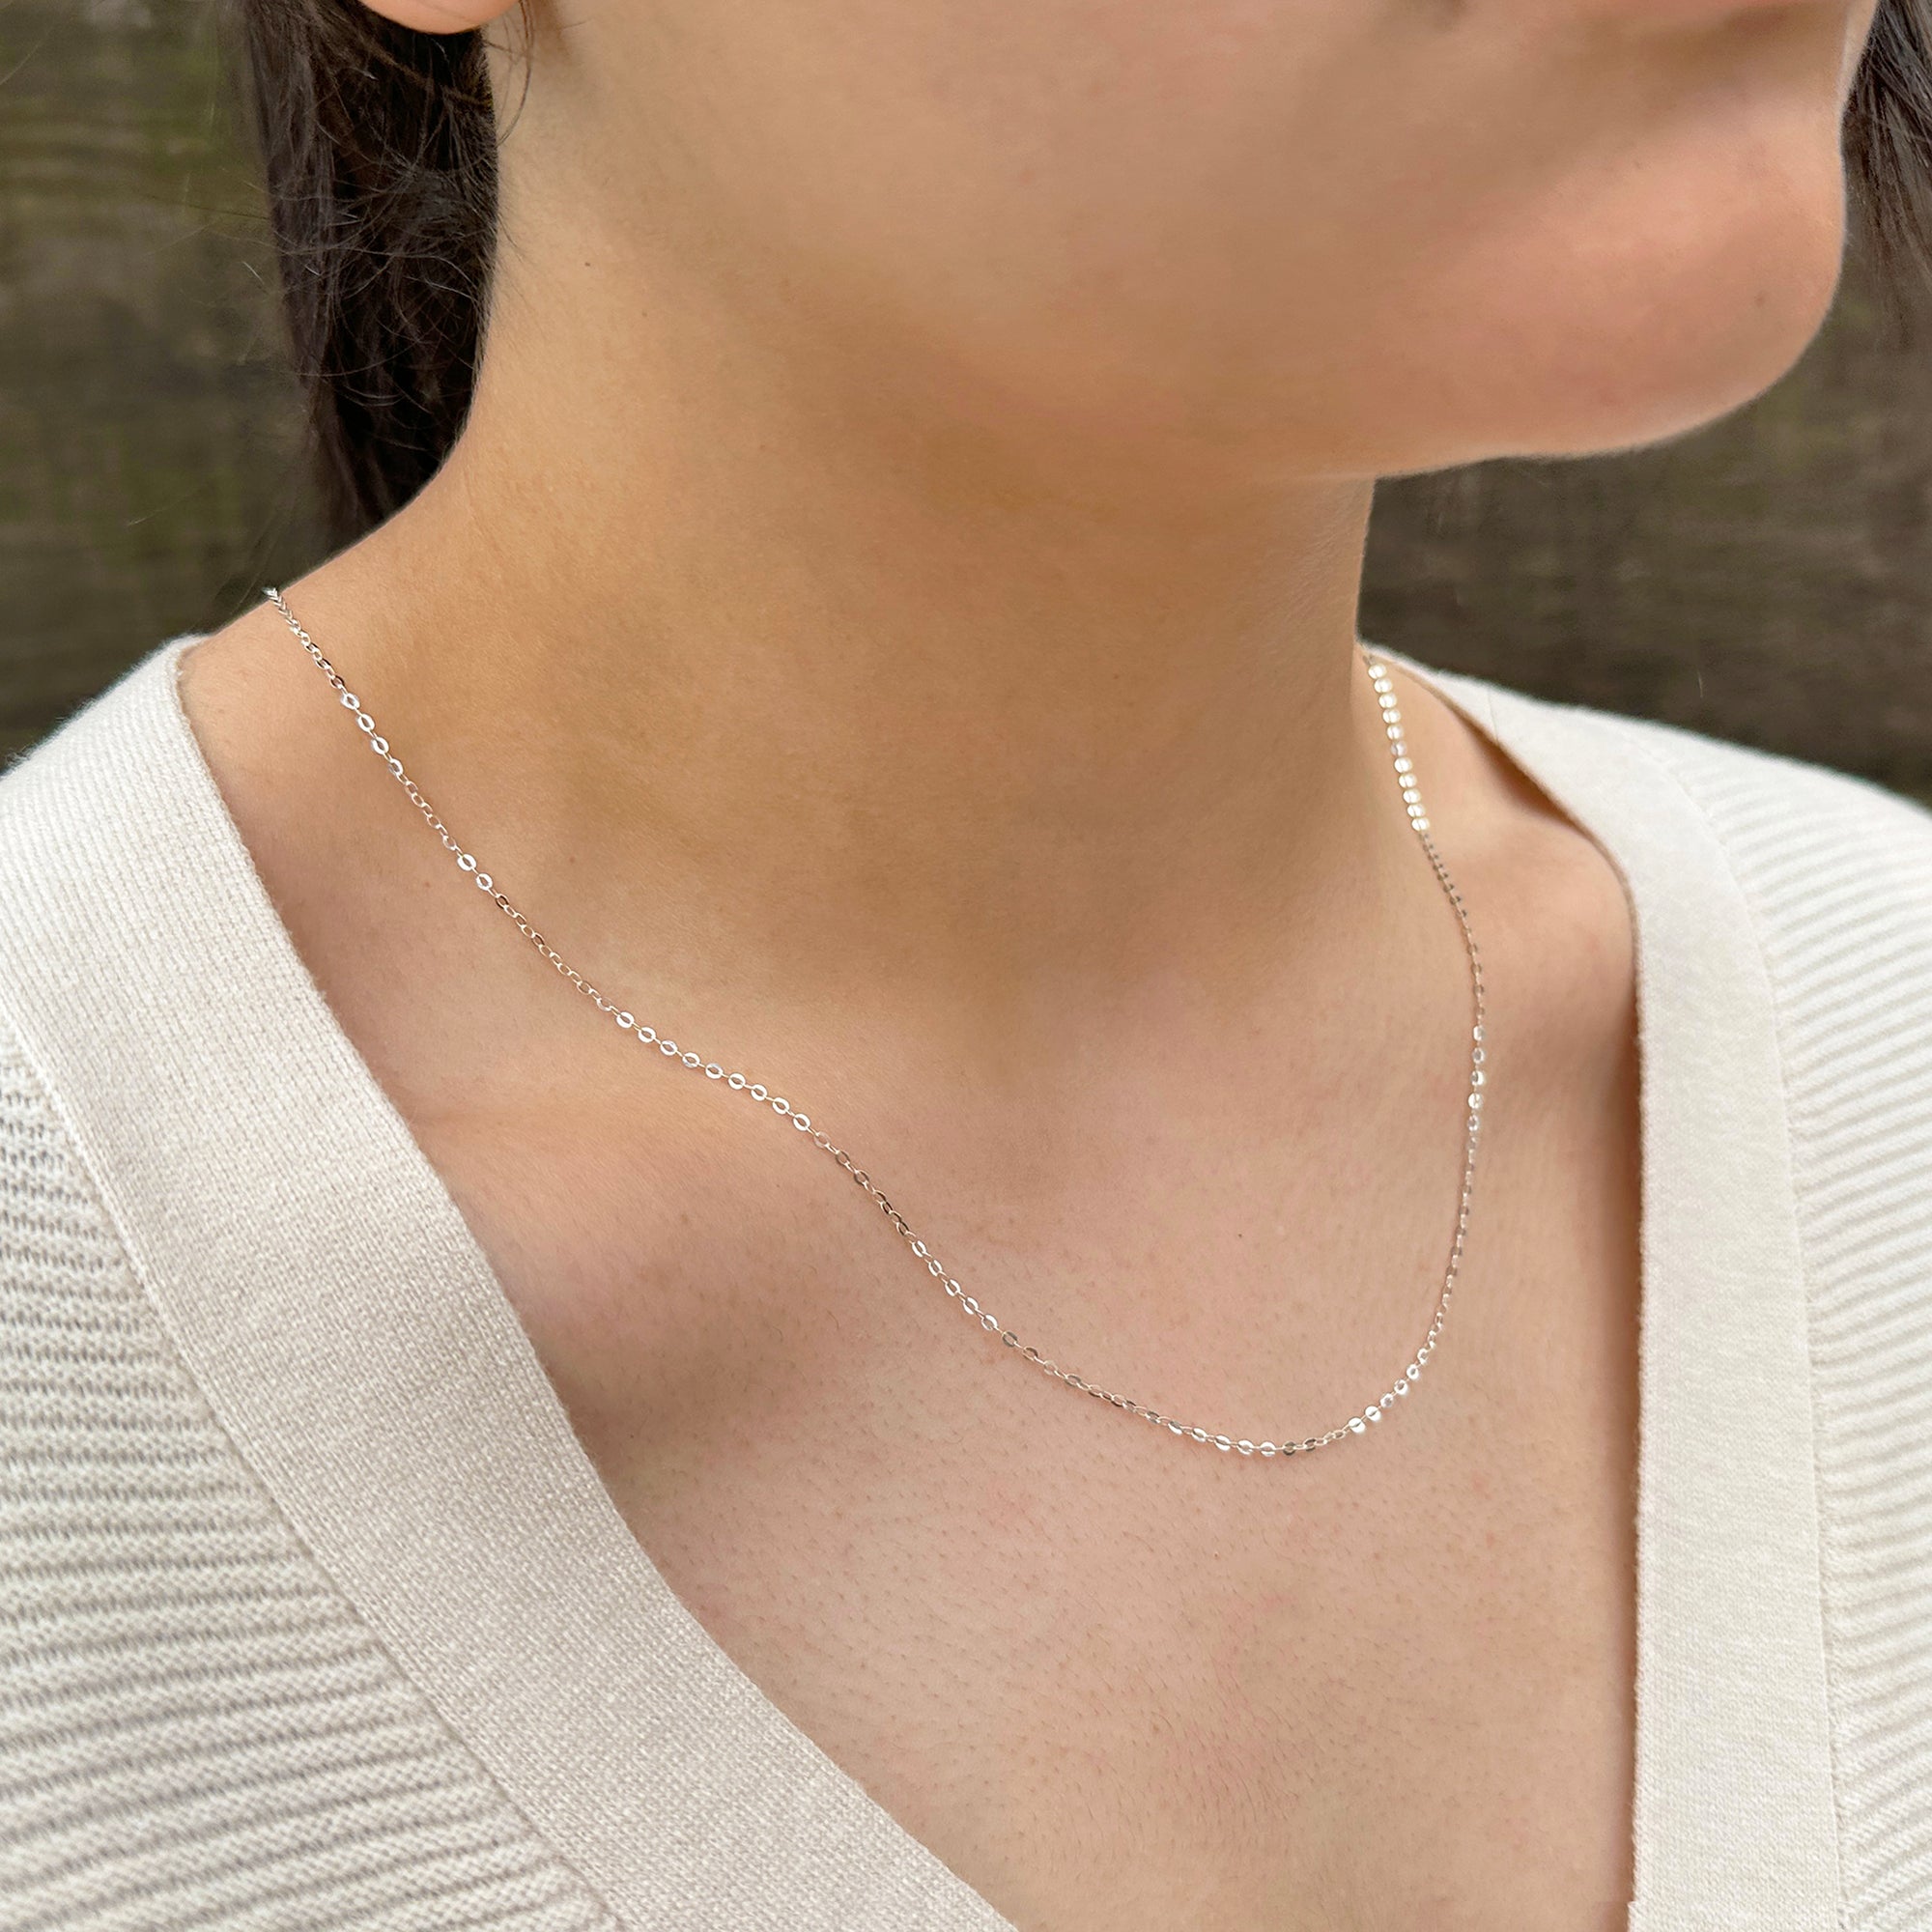 women wearing a delicate sterling silver cable chain sparkling in the sun